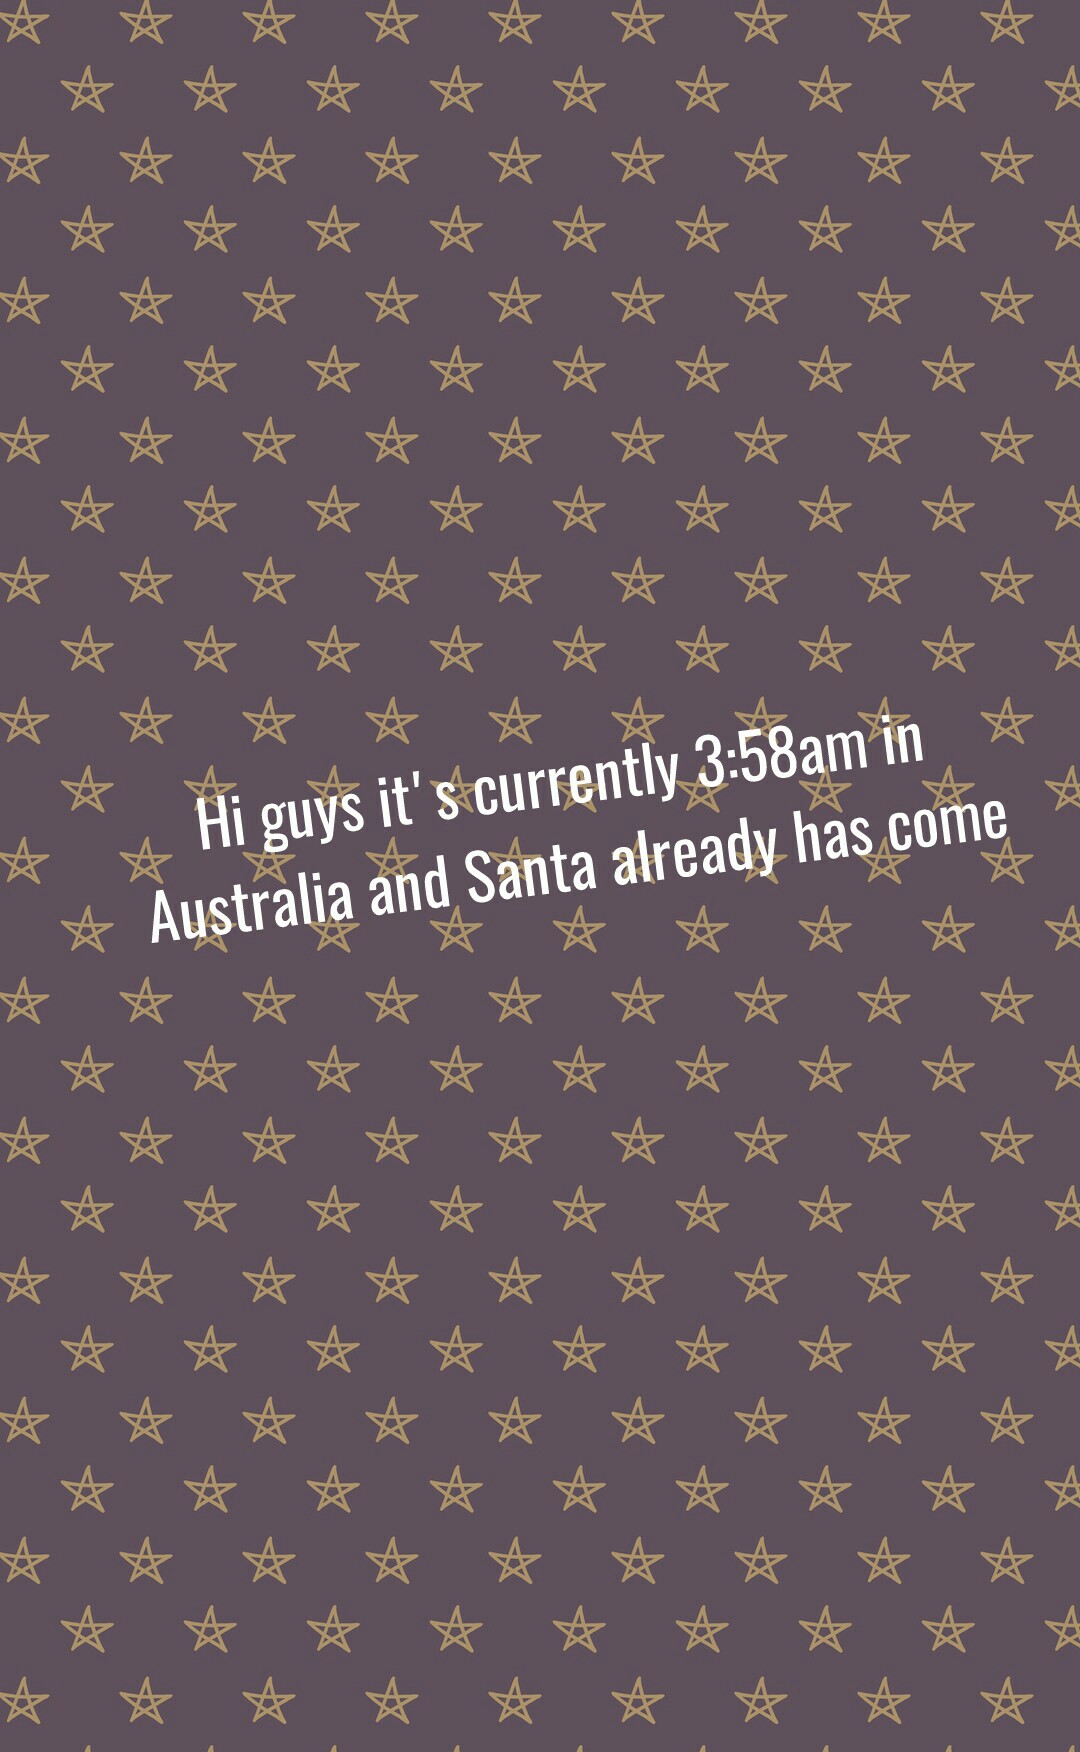 Hi guys it's currently 3:58am in Australia and Santa already has come